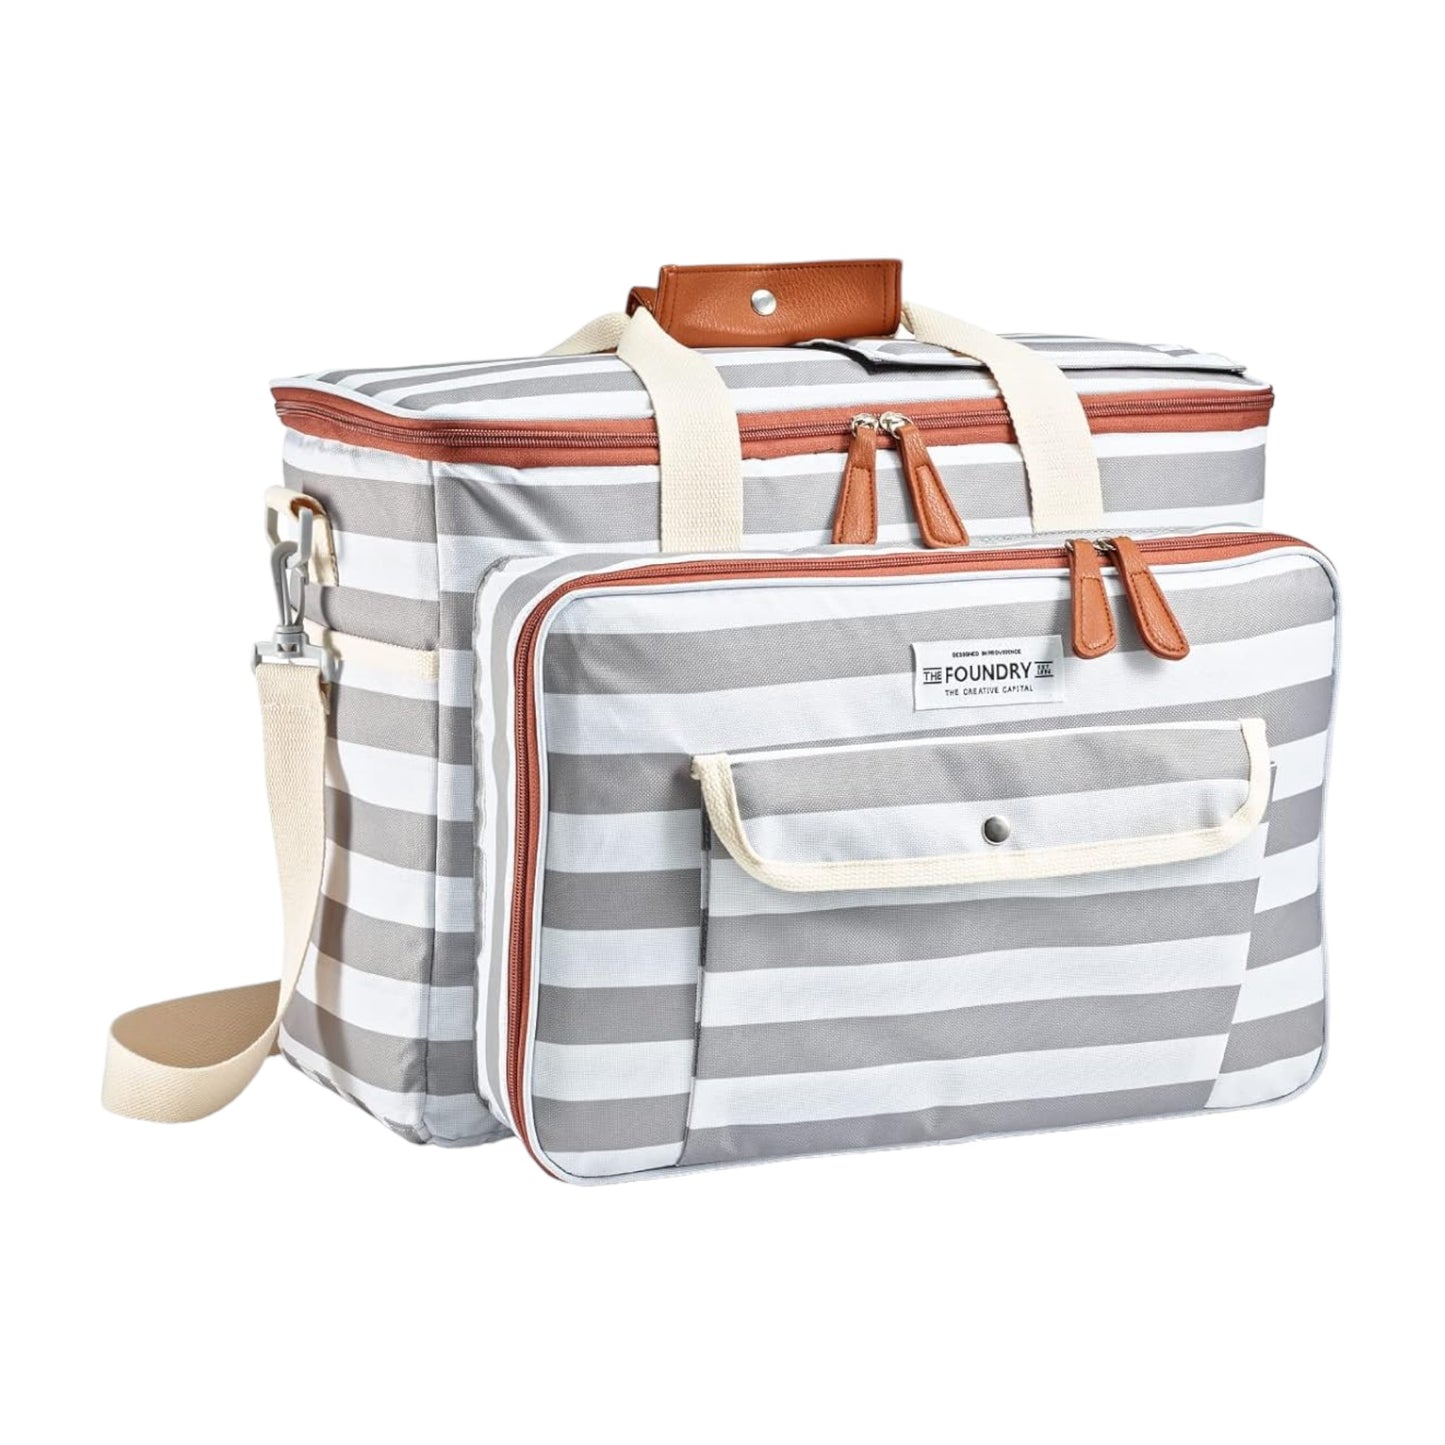 Ultimate Travel Companion: Foundry by Fit + Fresh Insulated Soft Cooler Bag - Complete Picnic Set Included! - Ricky's Garage